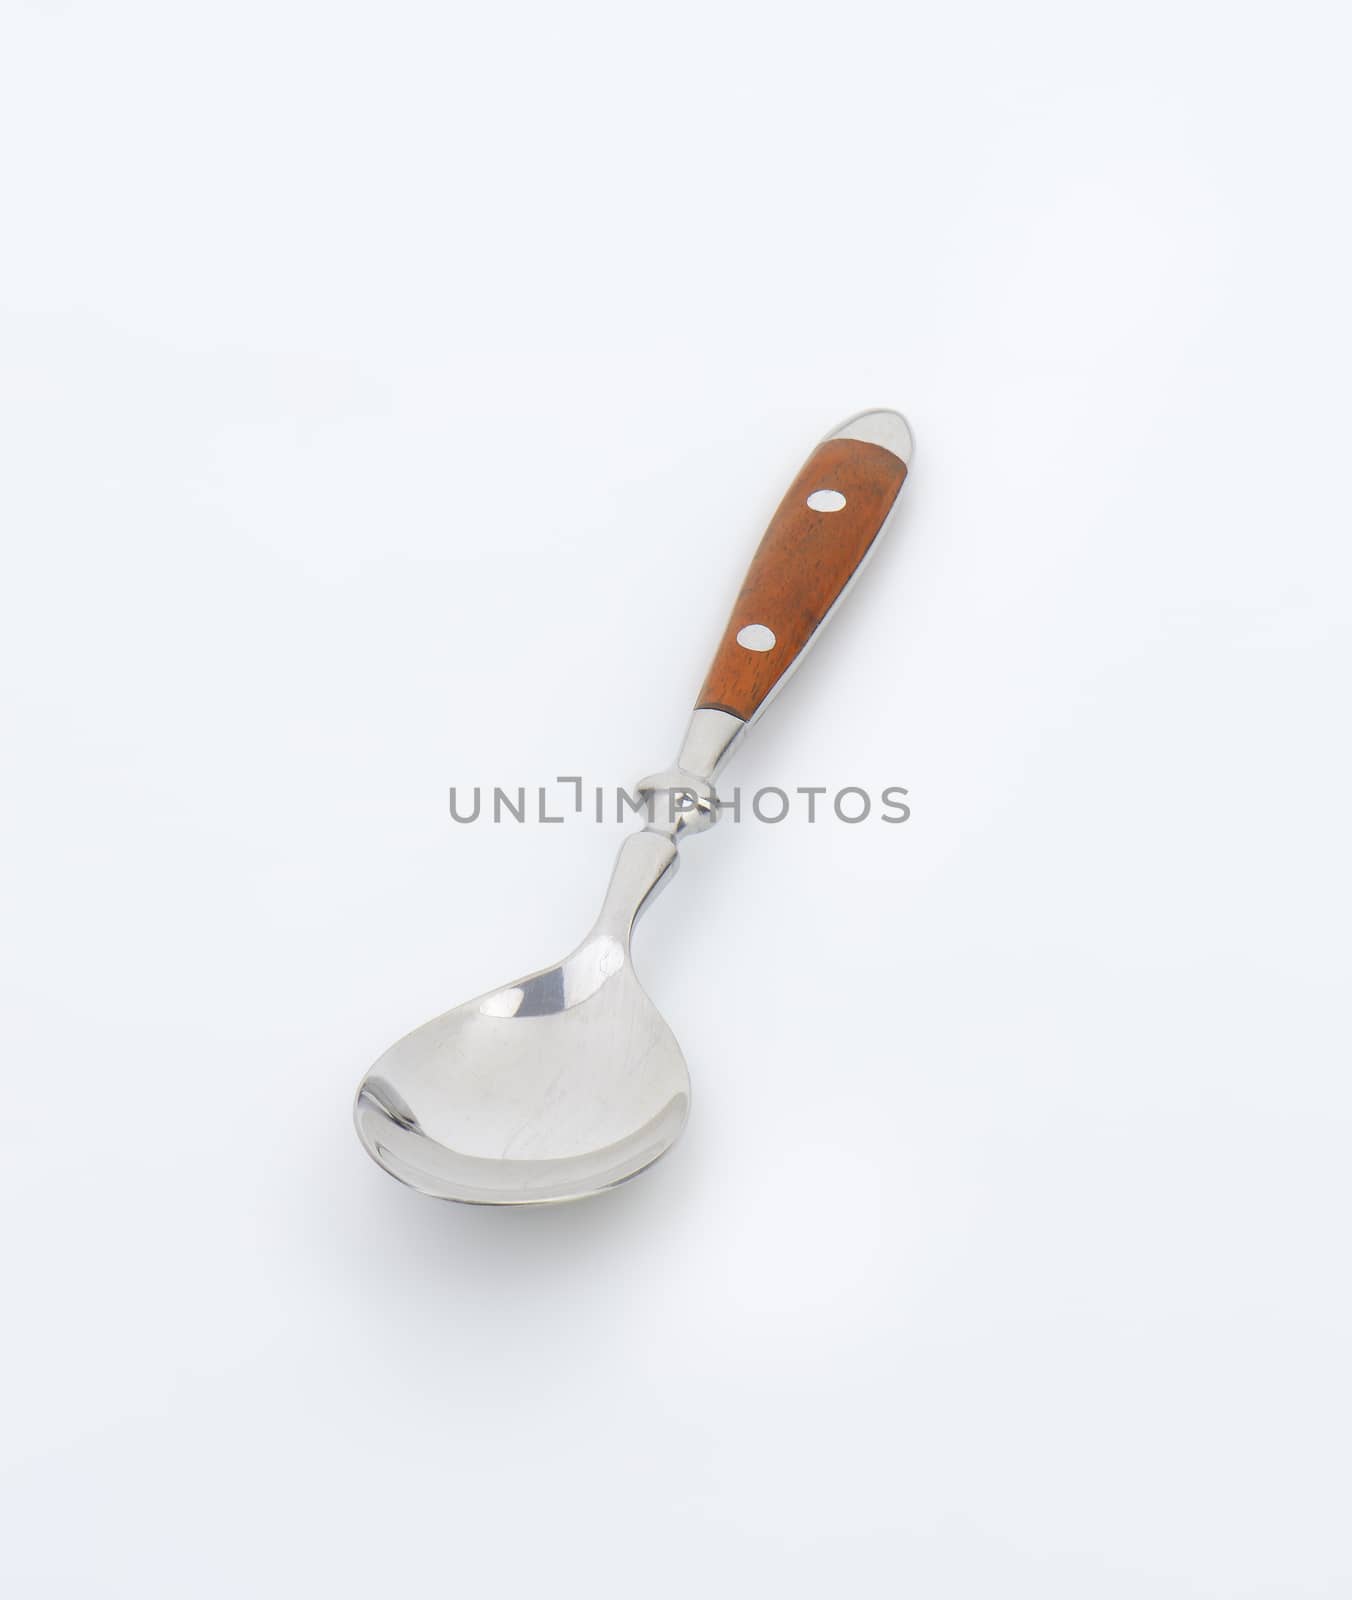 Wooden-handled table spoon by Digifoodstock